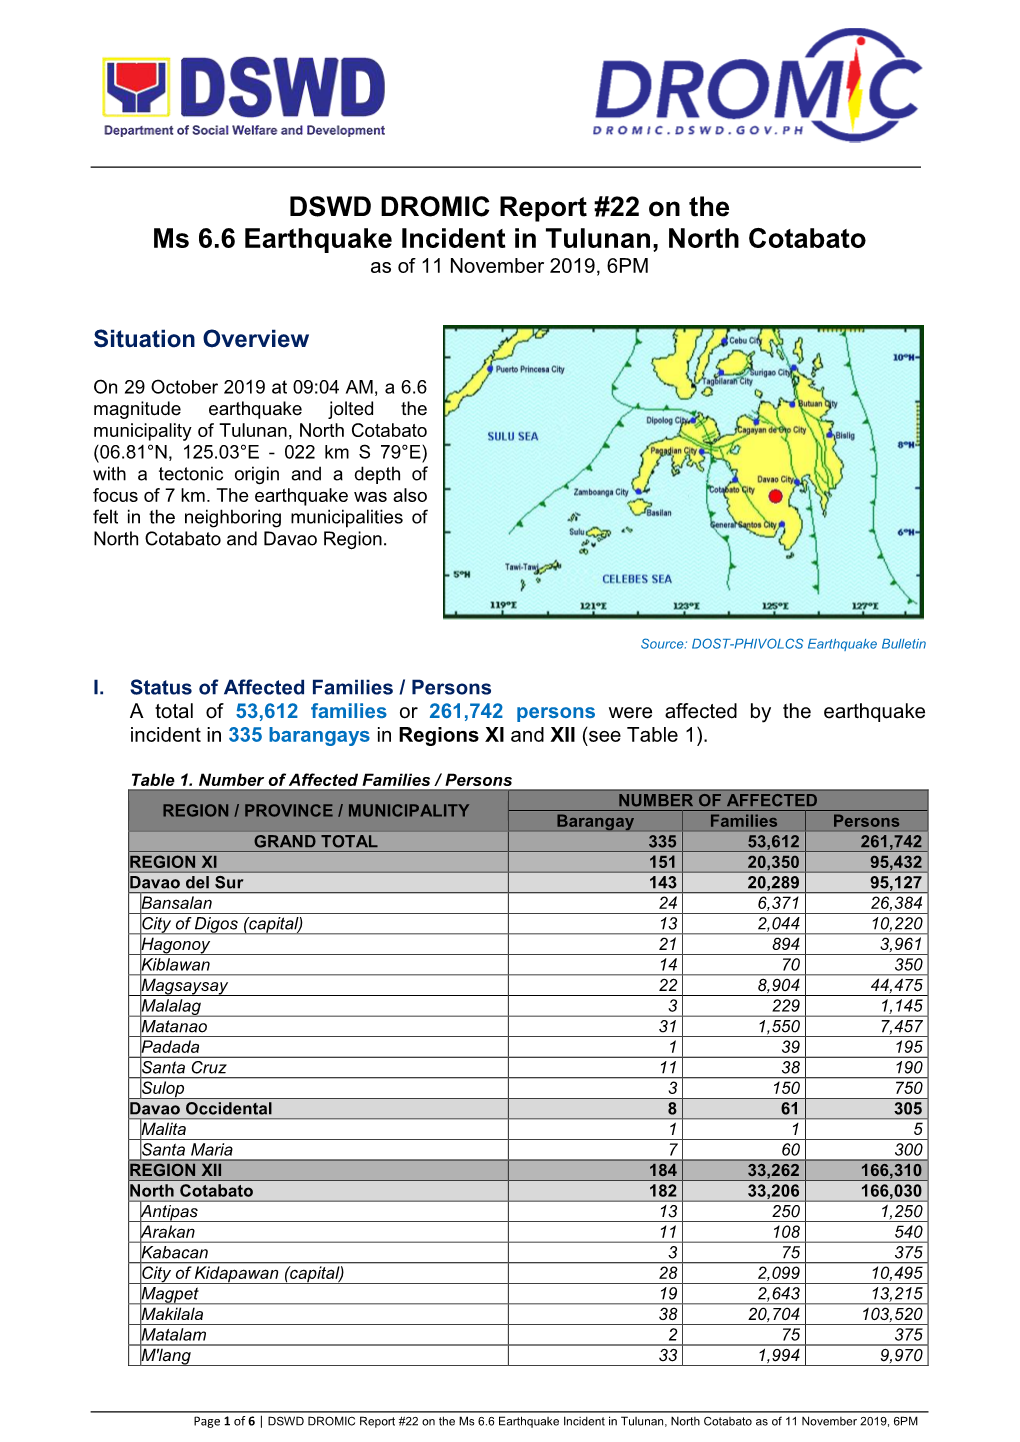 DSWD DROMIC Report #22 on the Ms 6.6 Earthquake Incident in Tulunan, North Cotabato As of 11 November 2019, 6PM